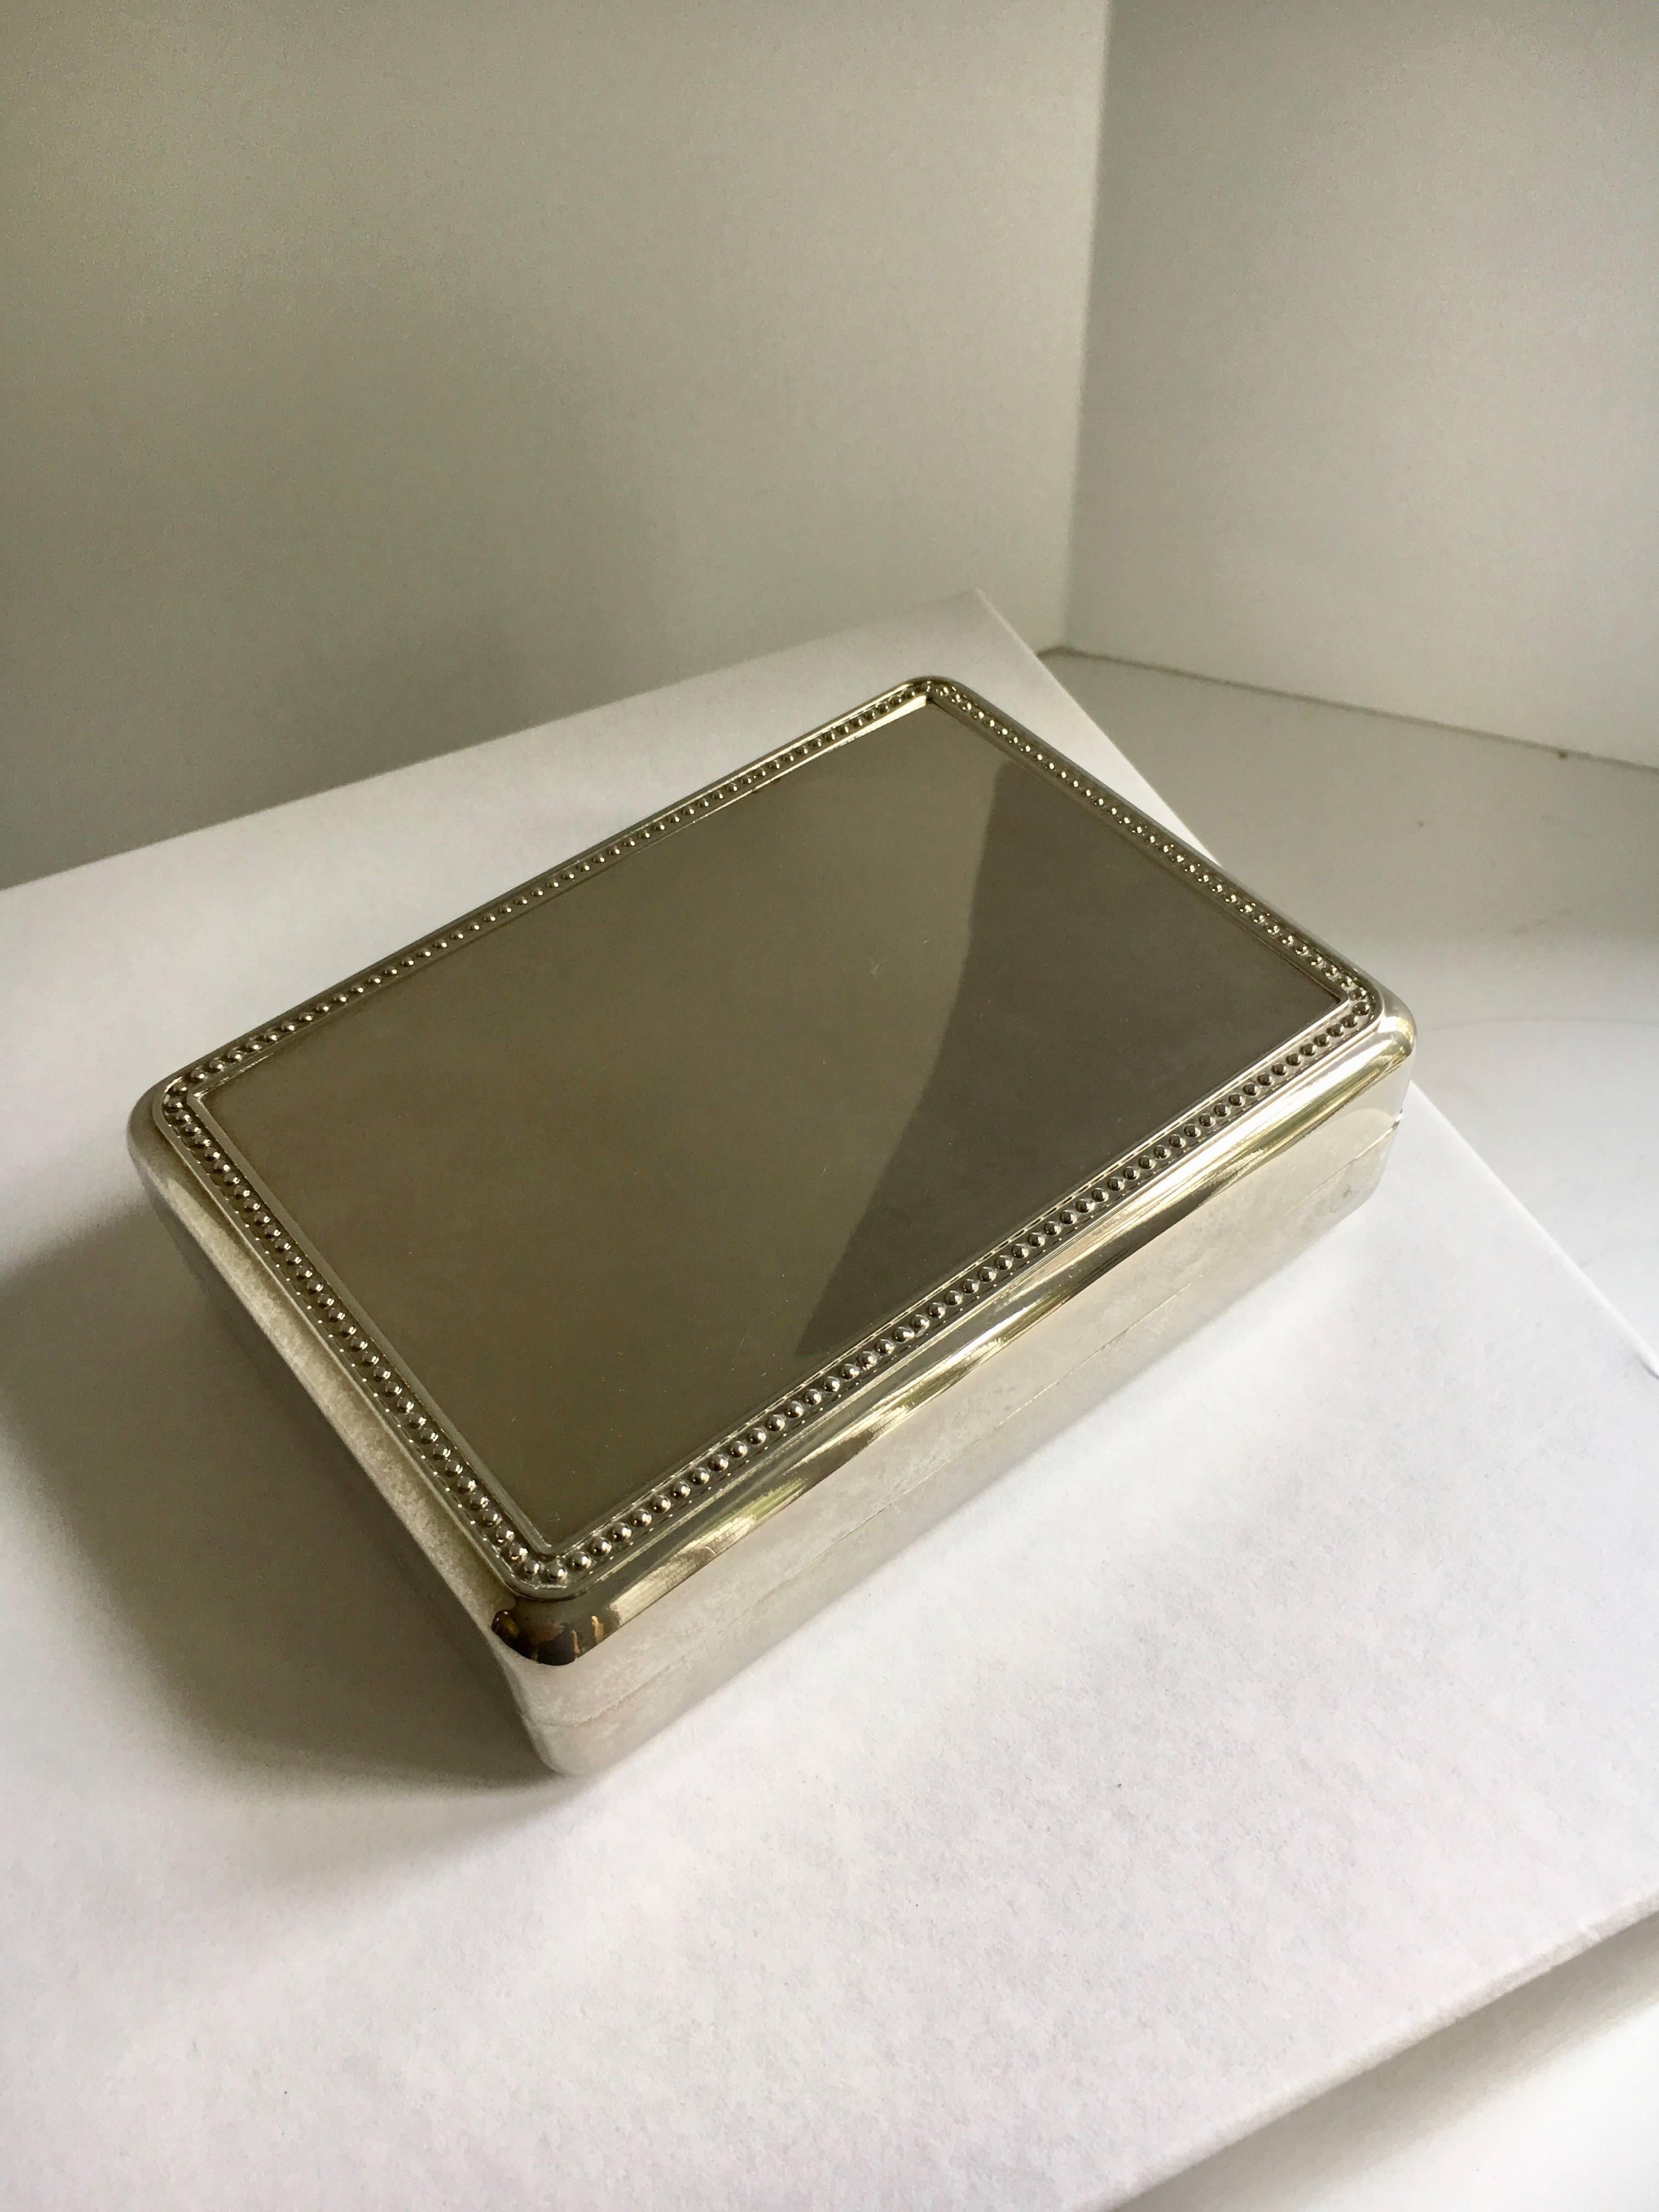 20th Century Silver Plate Box with Blue Interior